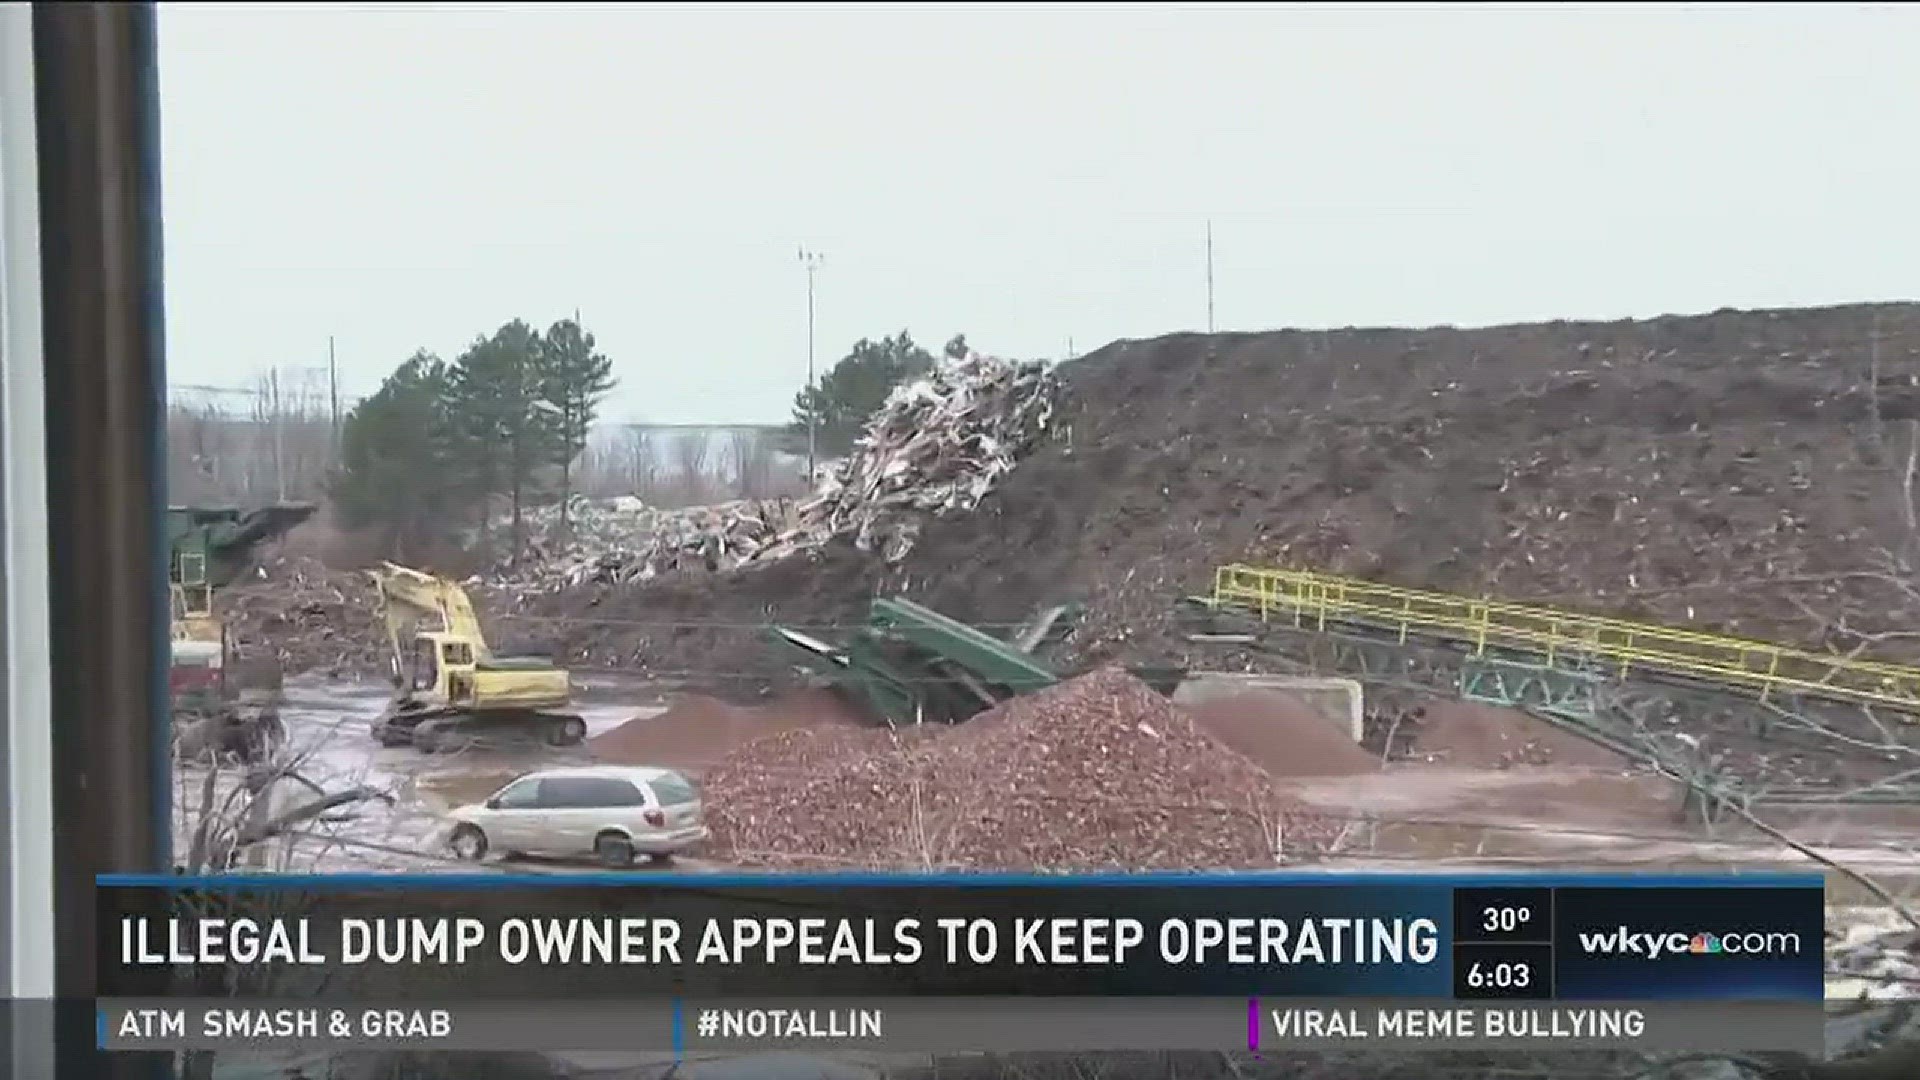 Illegal dump owner appeals to keep operating